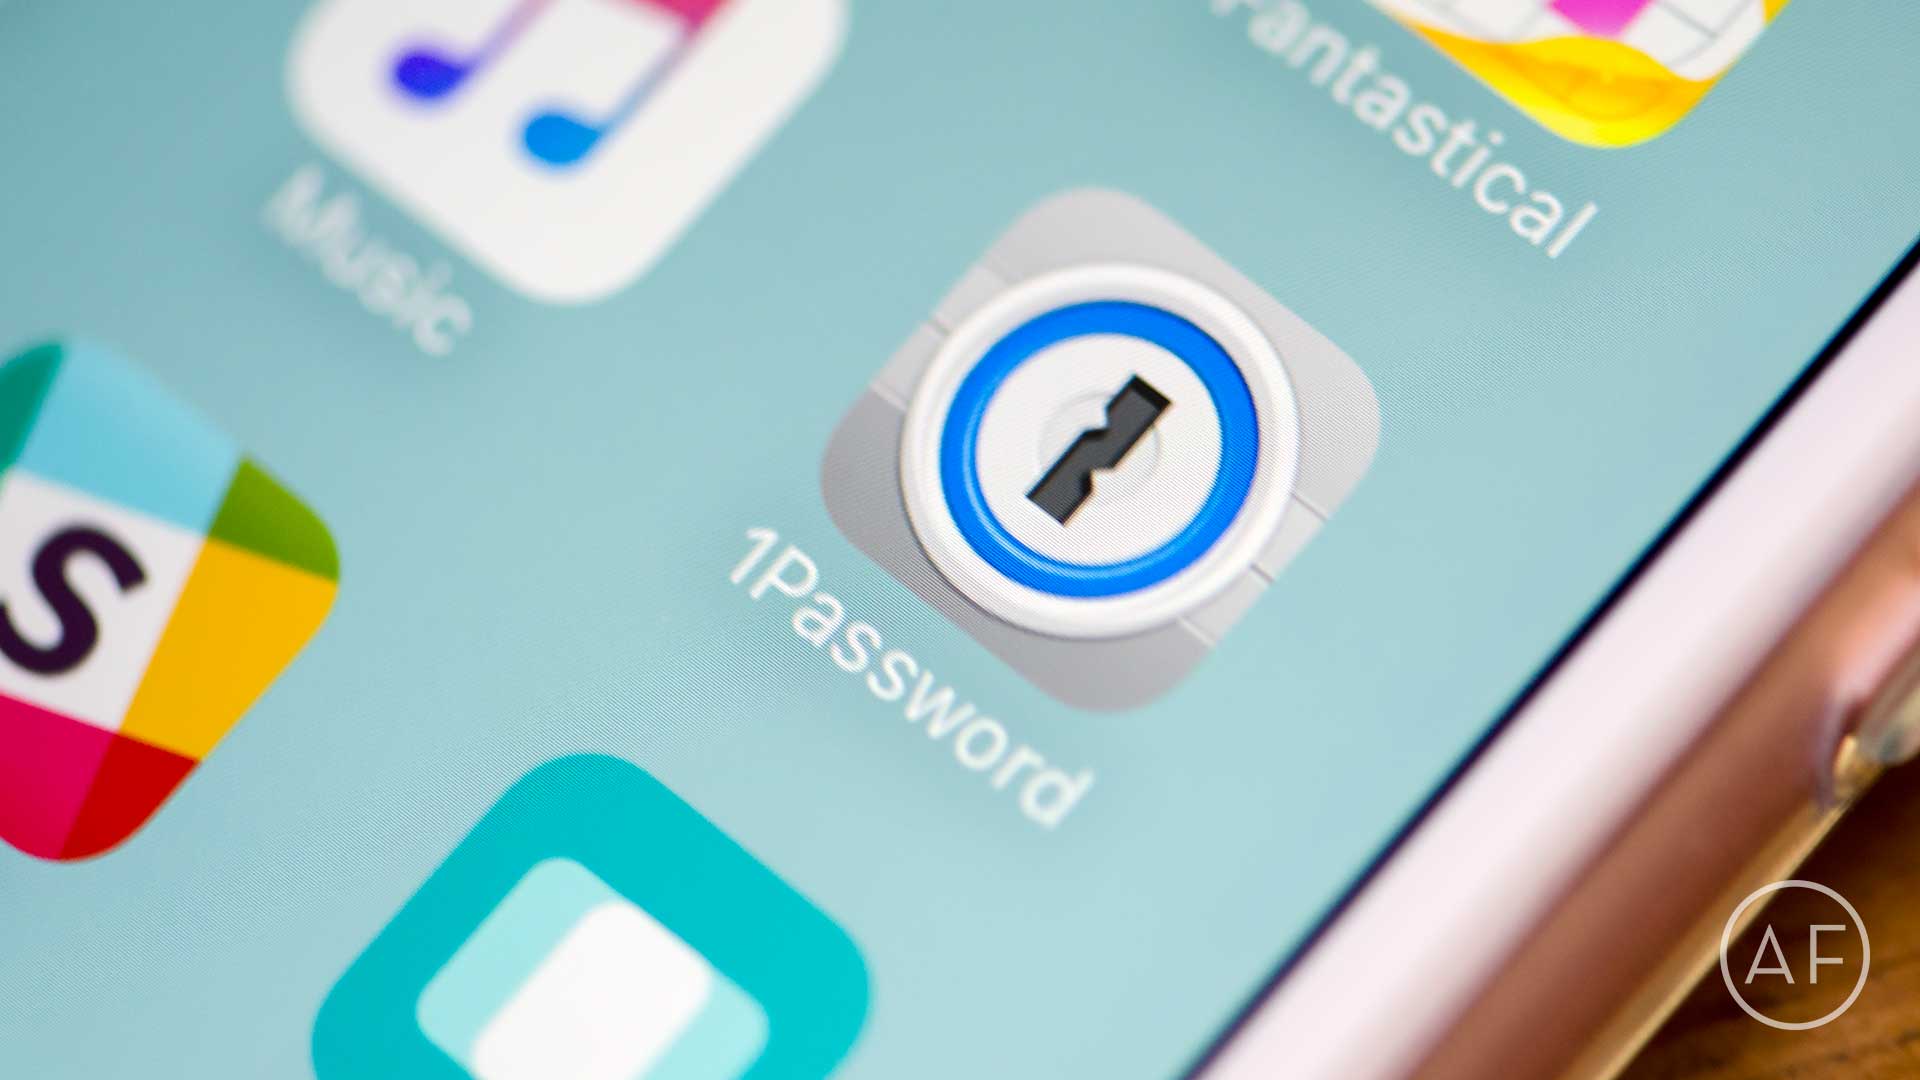 Using the same password over and over, or keeping track of passwords in the Notes app is bad practice. Here's how to manage all your passwords safely and conveniently!